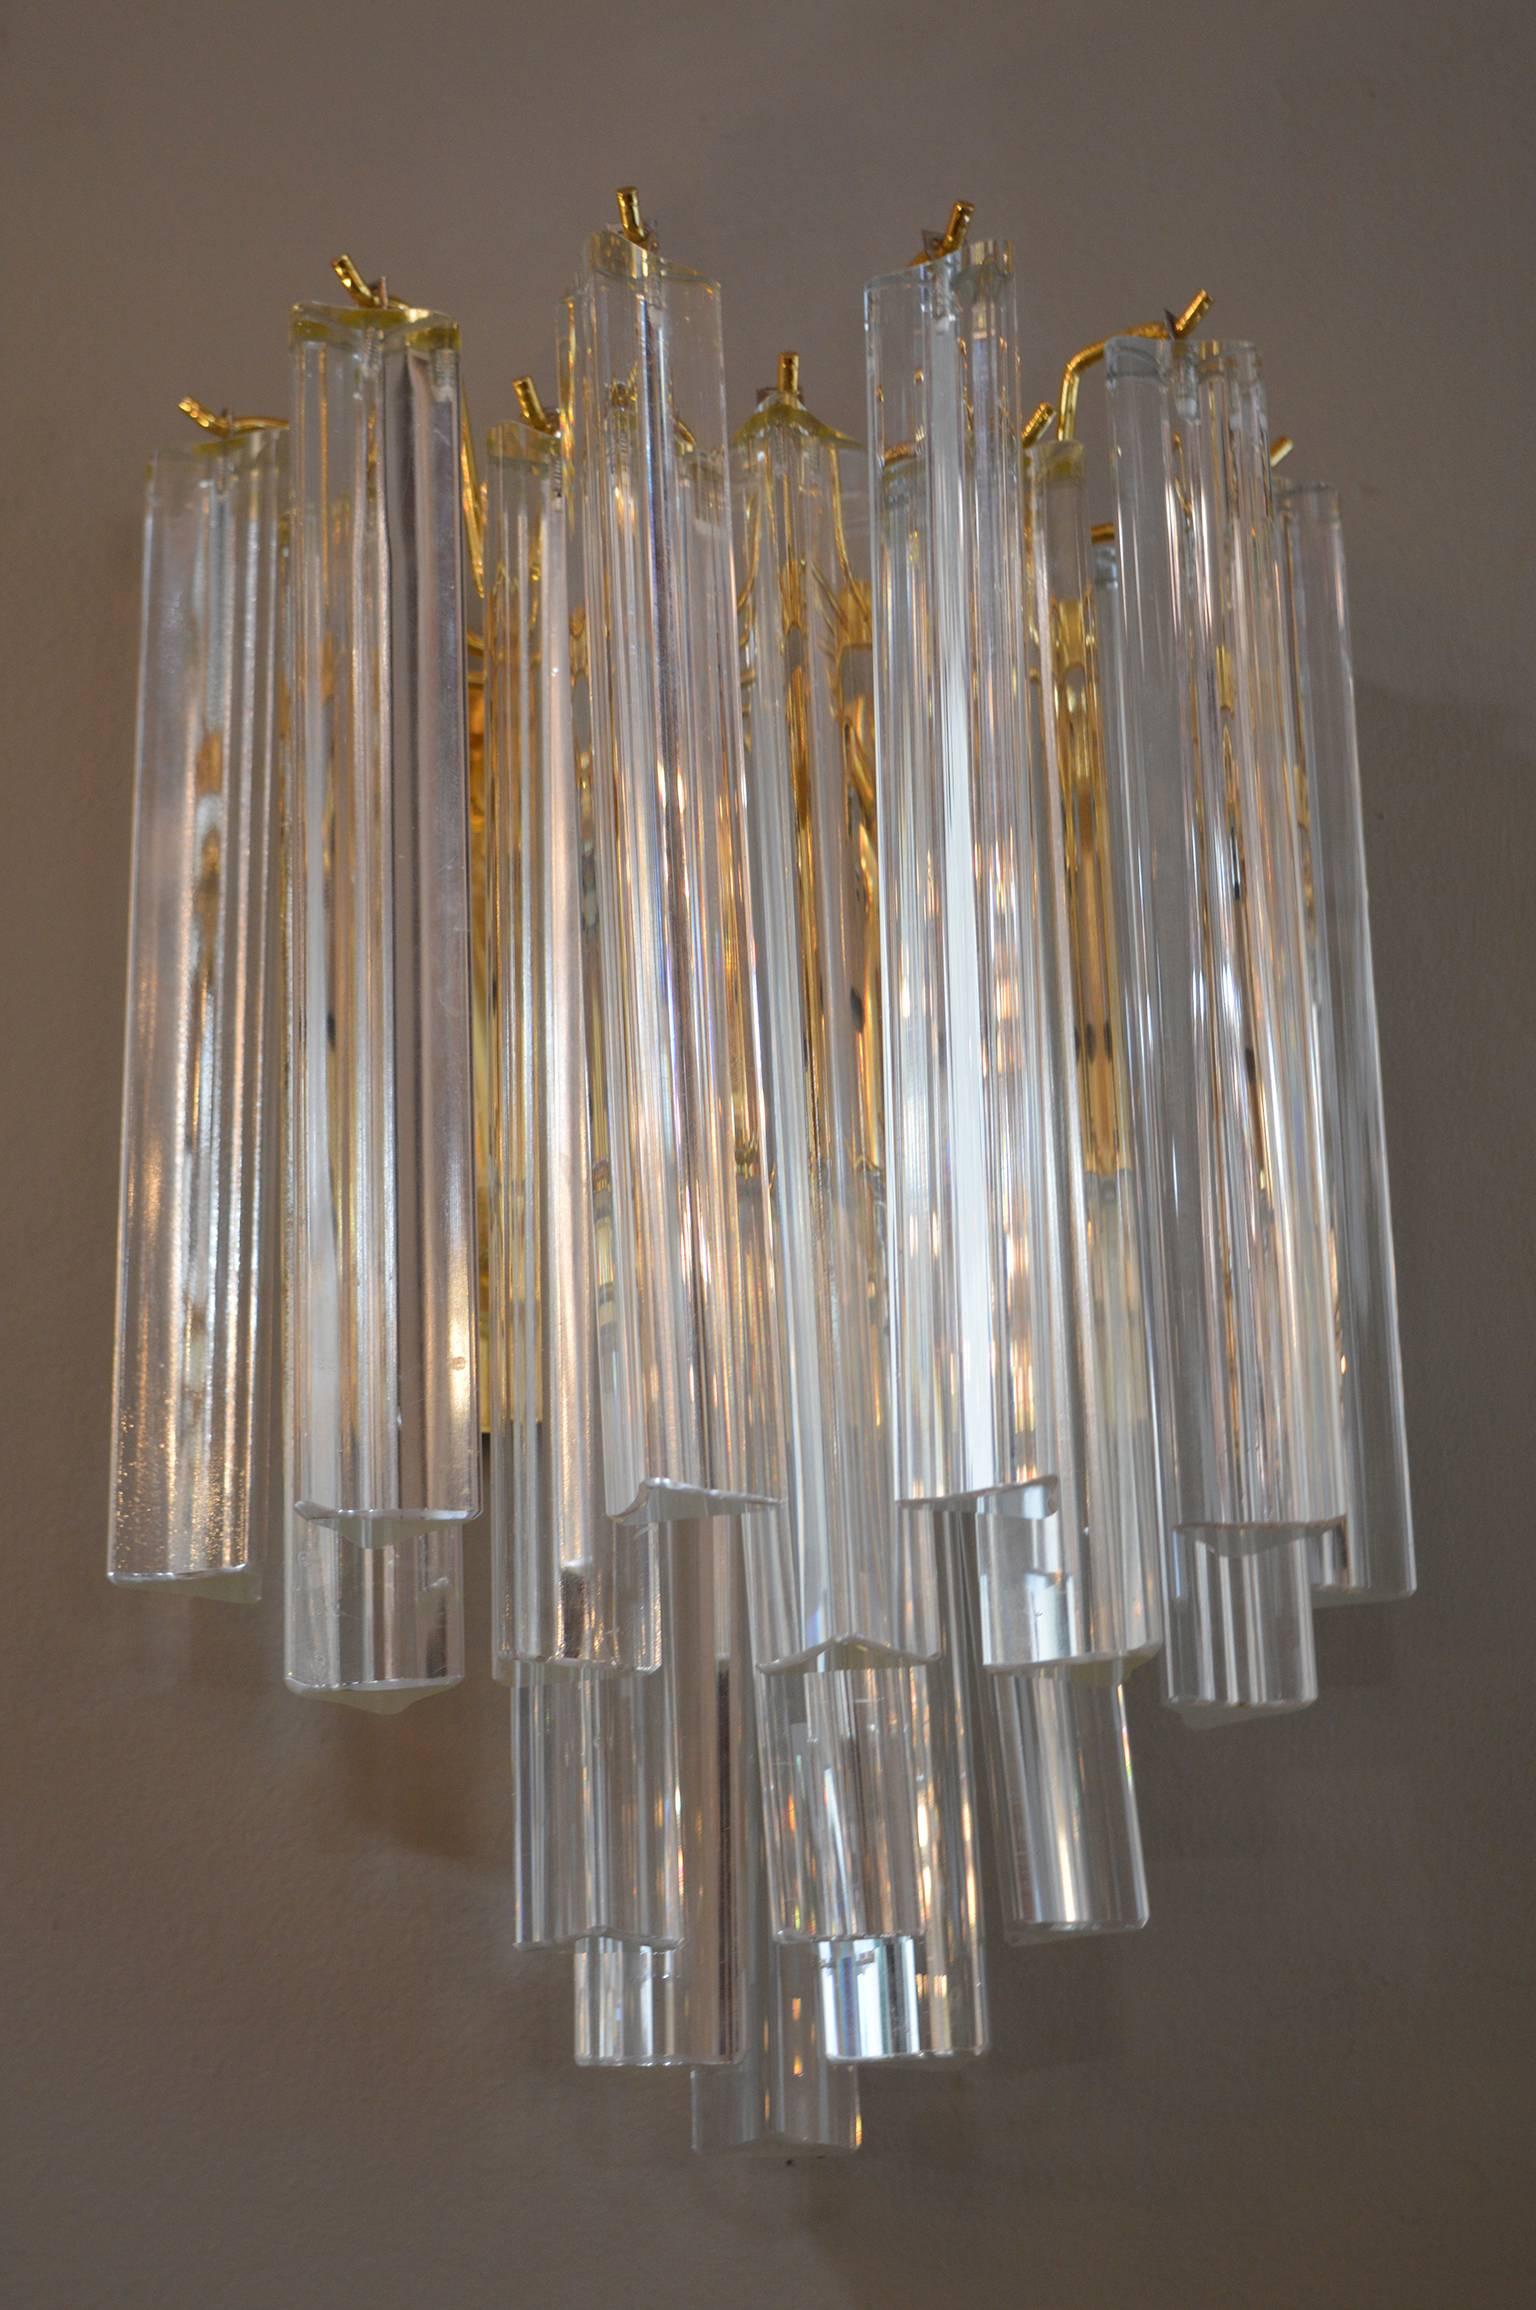 Luxe pair of Venini sconces.
Two candelabra type bulbs per each sconce.
Purchased North of Milano, Italy from President's Hotel in the Brescia area. The hotel originally opened in 1960 and closed fall of 2013.